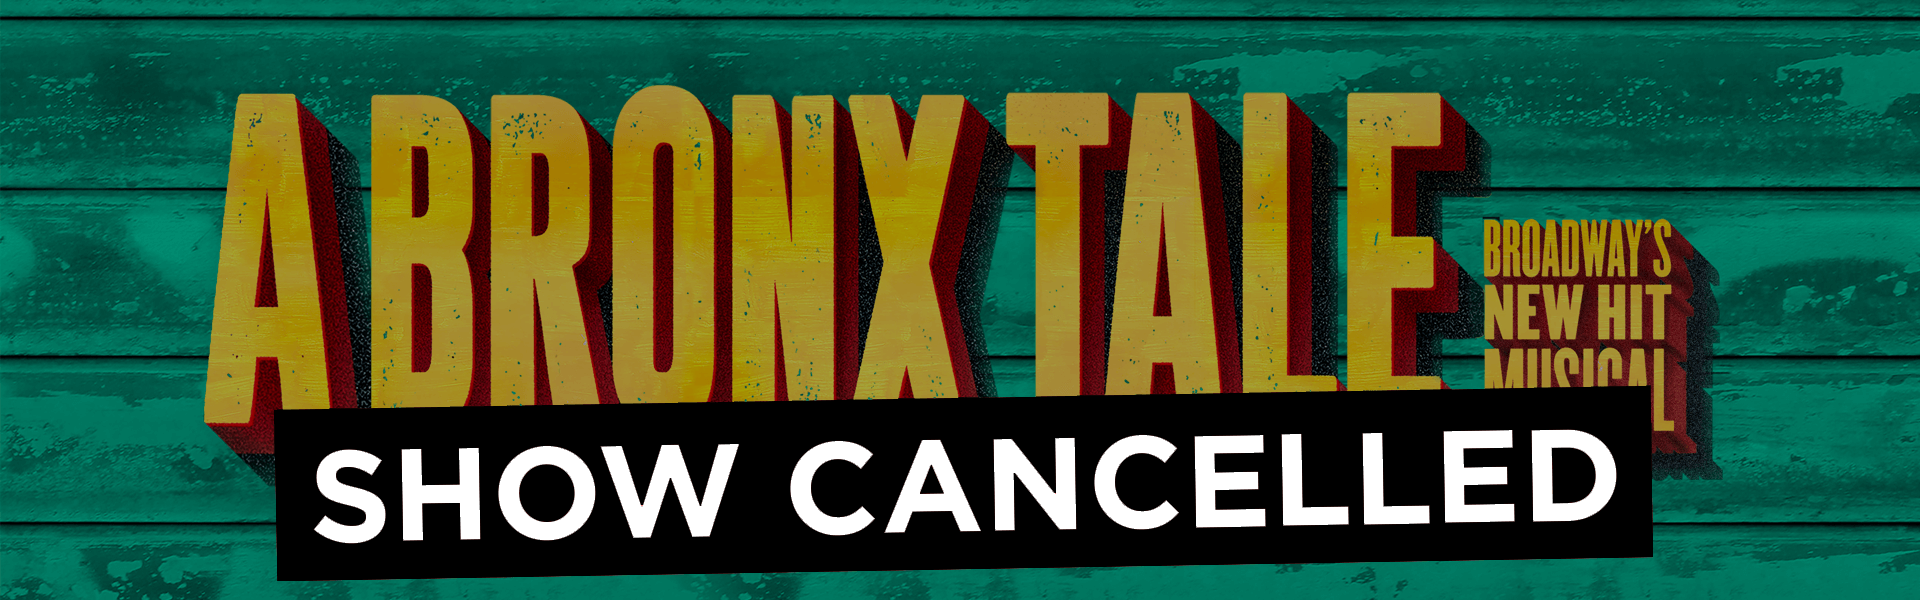 Bronx Tale cancelled